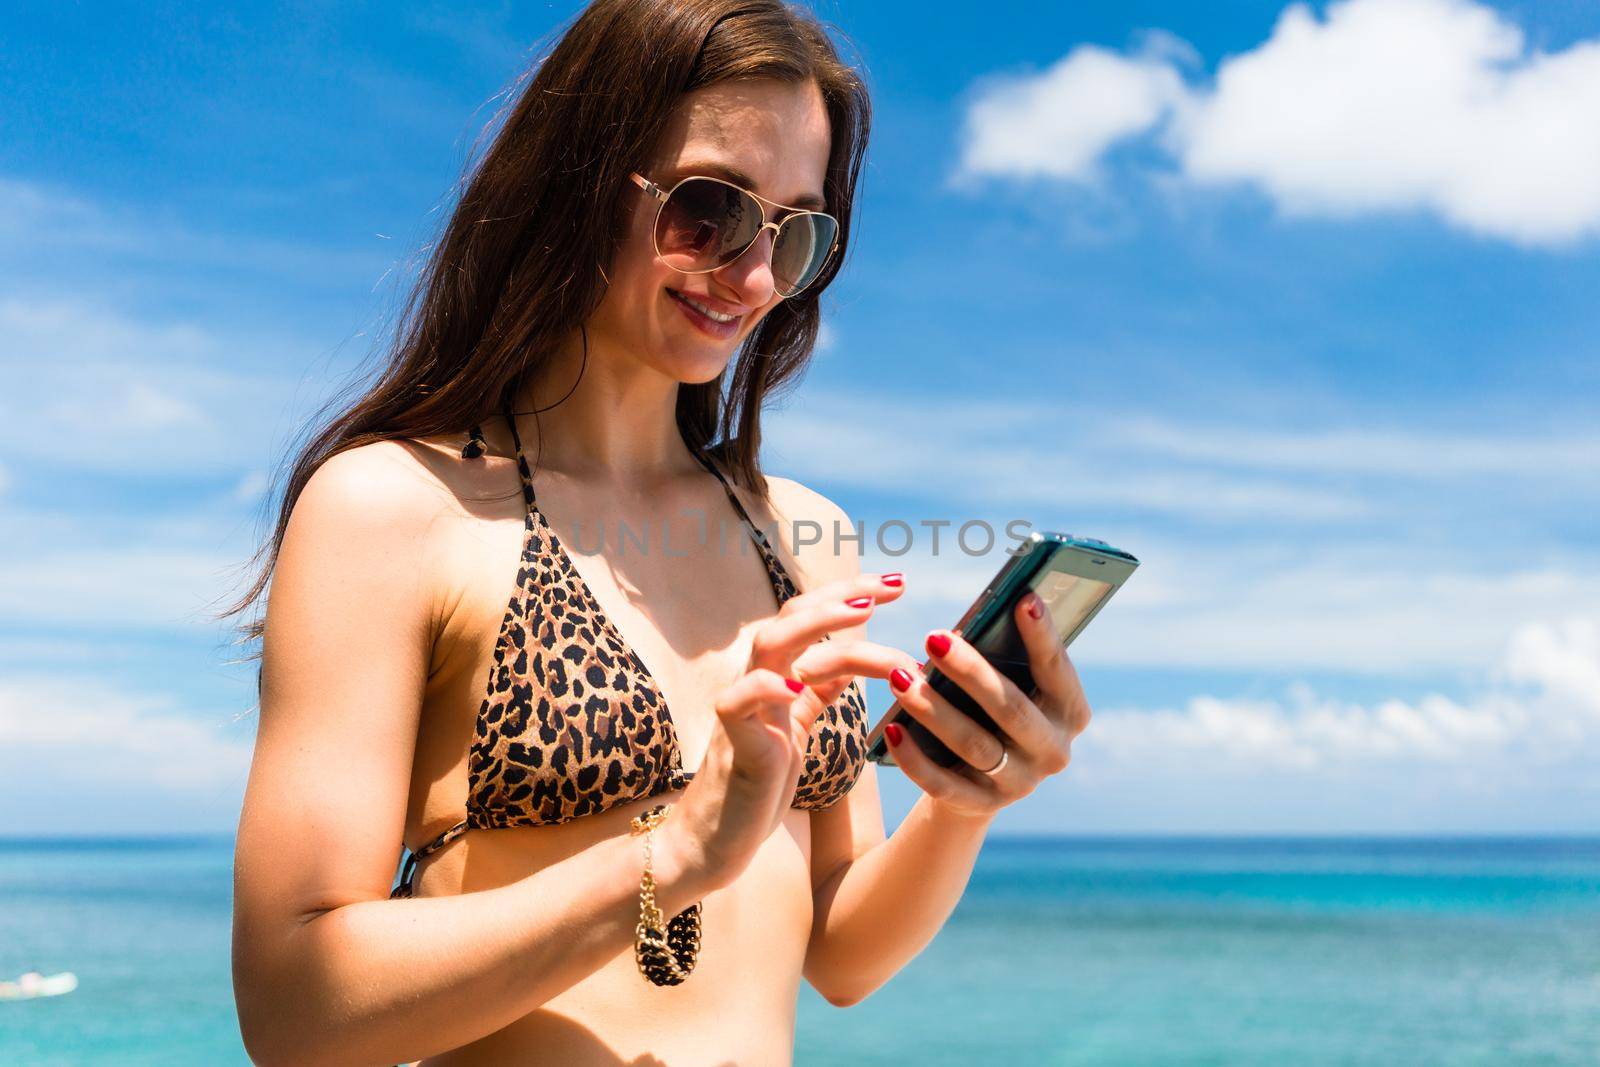 Woman on beach with phone chatting by Kzenon